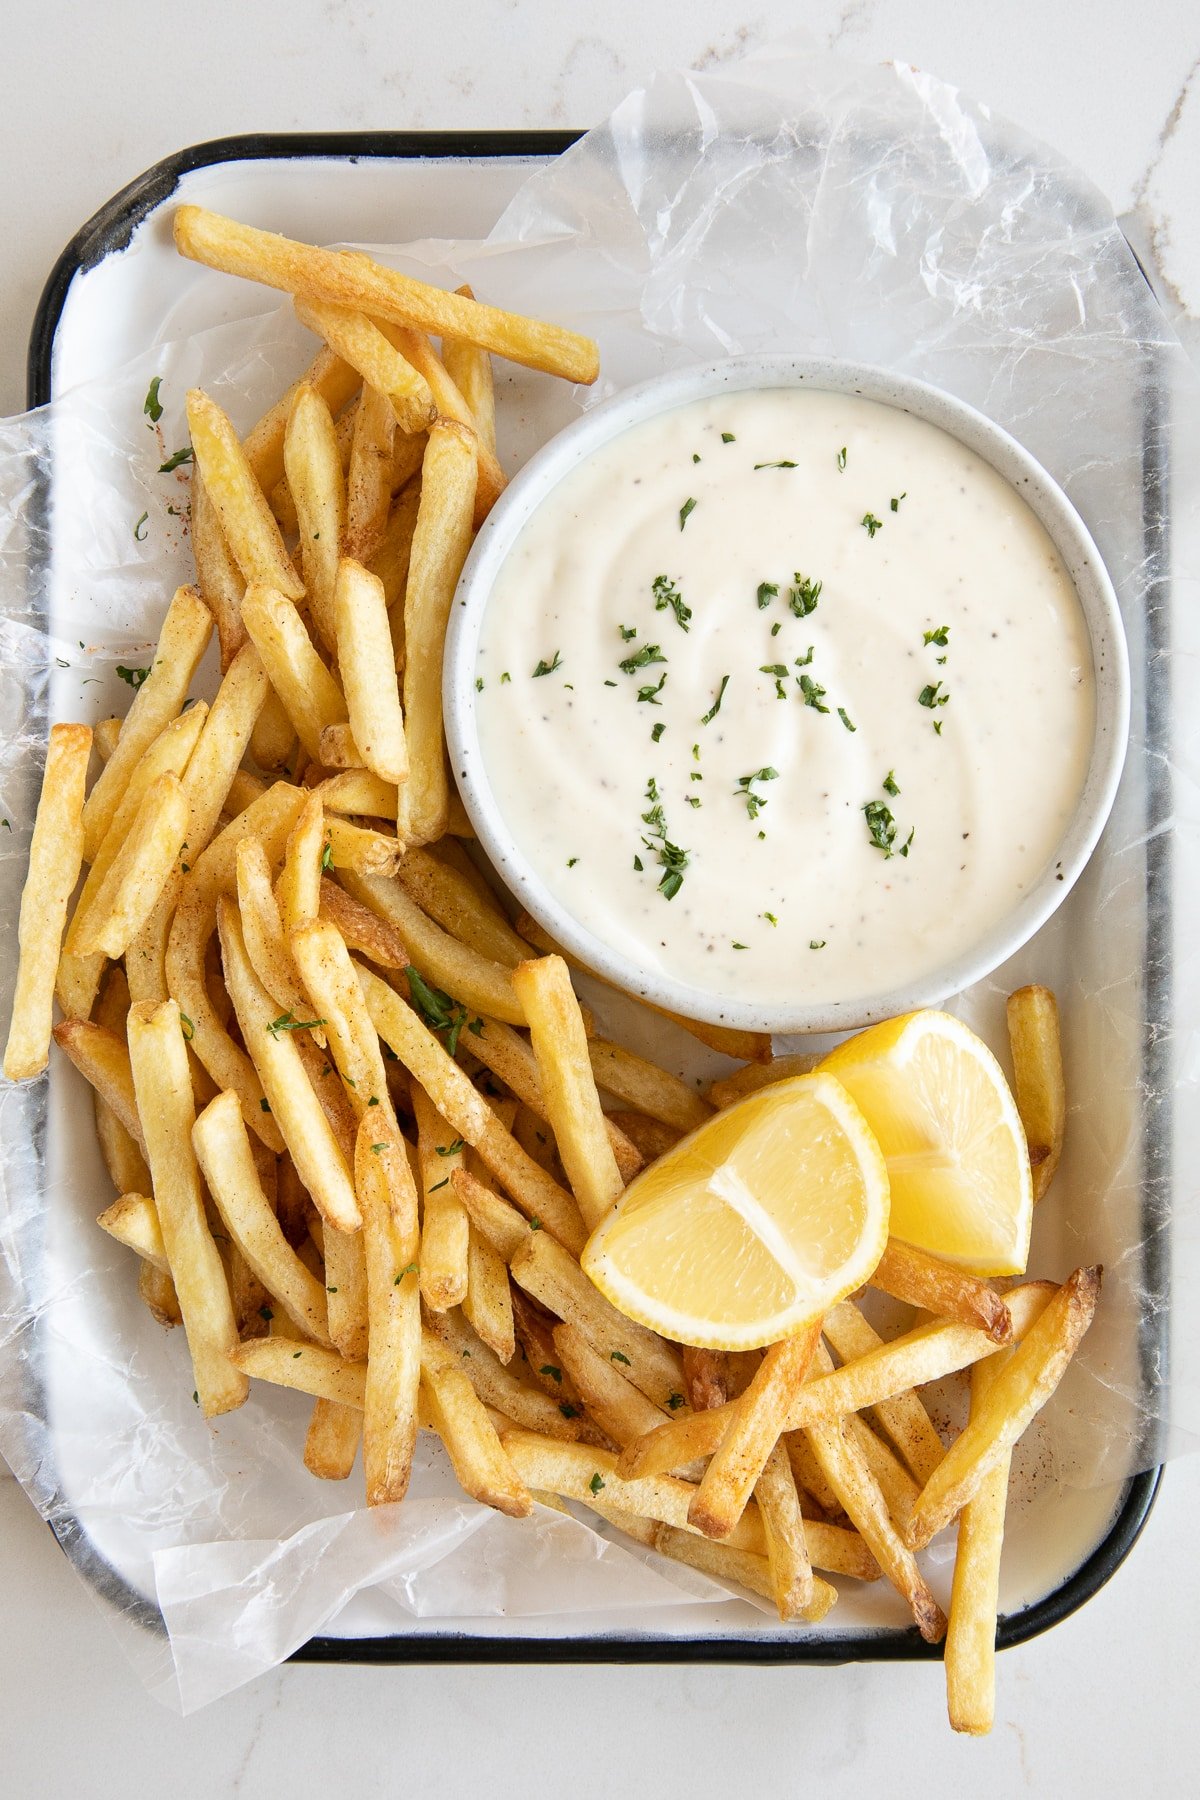 Overhead image of a small serving tray filled with fresh fries, lemon wedges, and a small shallow bowl of homemade garlic aioli.